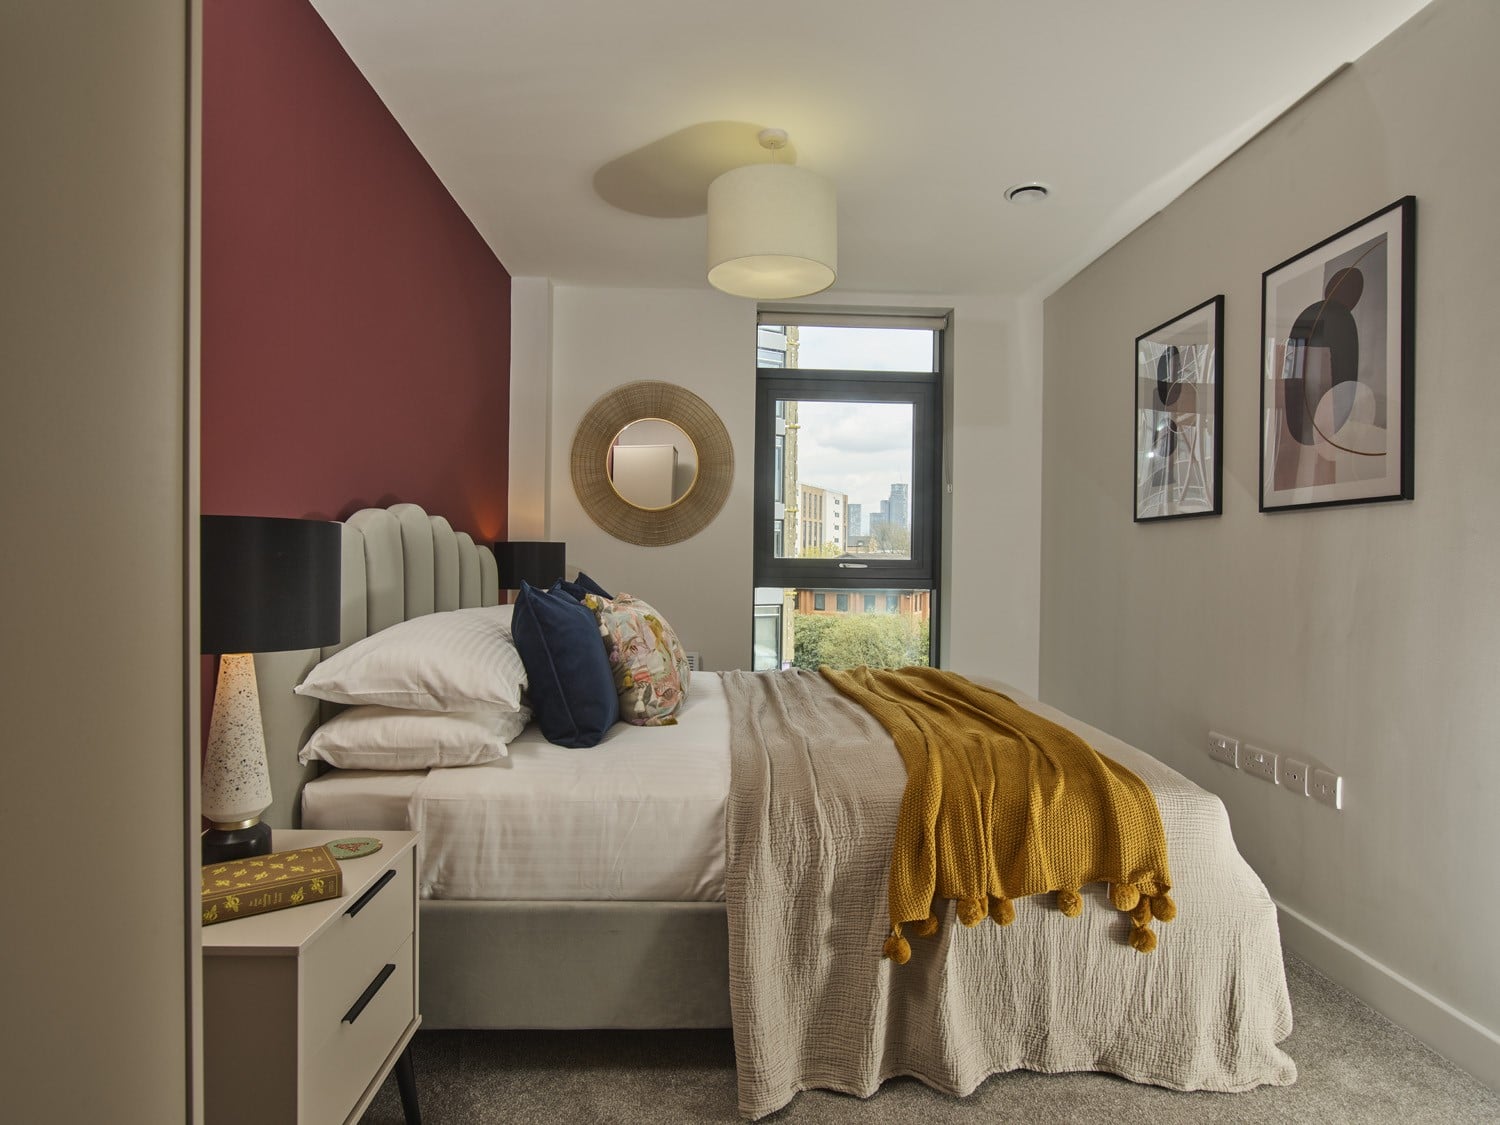 Internal photography of Clarion's Amplify Apartments - Shared Ownership and Help to Buy homes available on Share to Buy